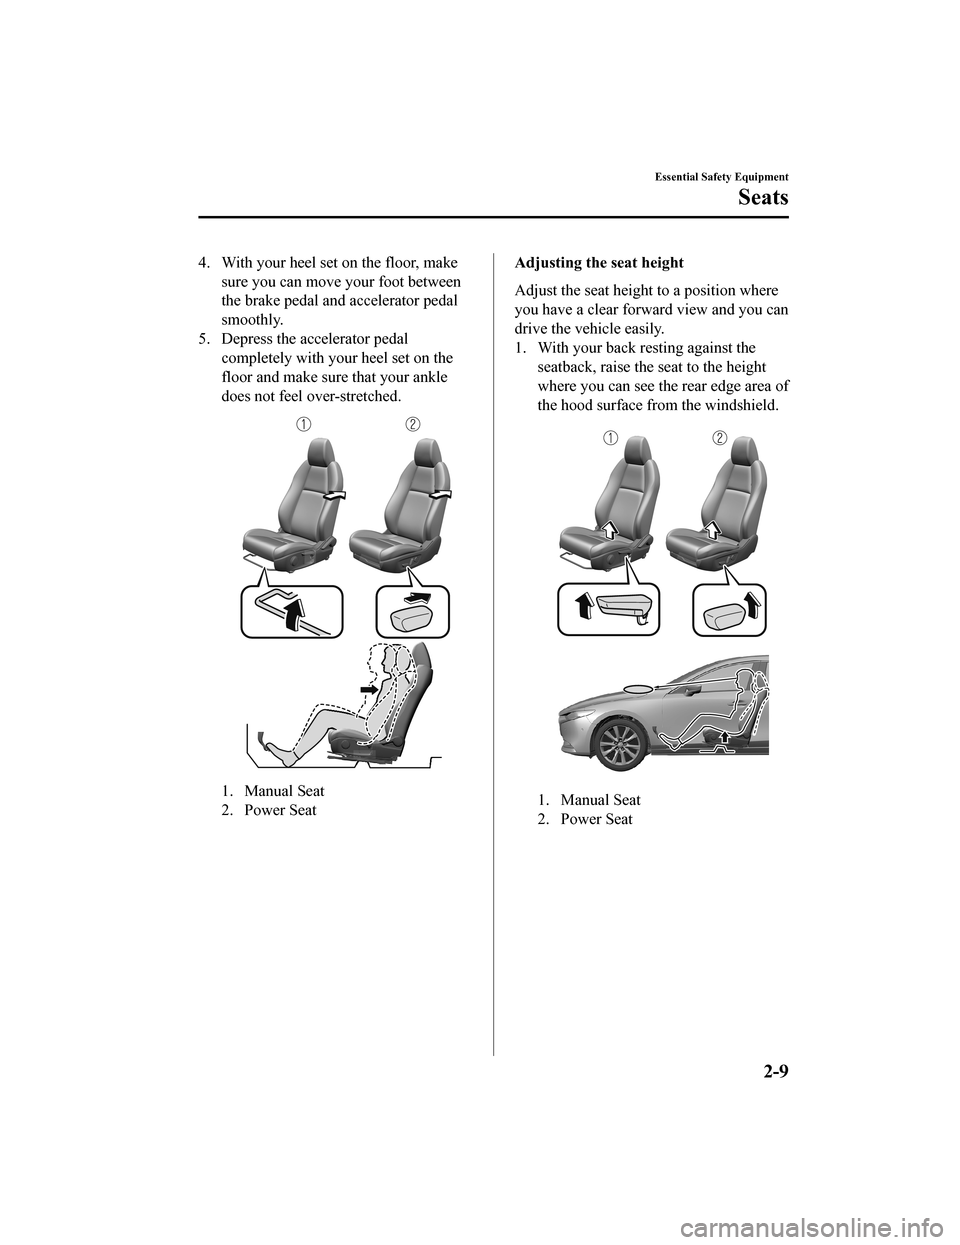 MAZDA MODEL 3 HATCHBACK 2020   (in English) Owners Manual 4. With your heel set on the floor, make
sure you can move your foot between
the brake pedal and accelerator pedal
smoothly.
5. Depress the accelerator pedal
completely with your heel set on the
floor